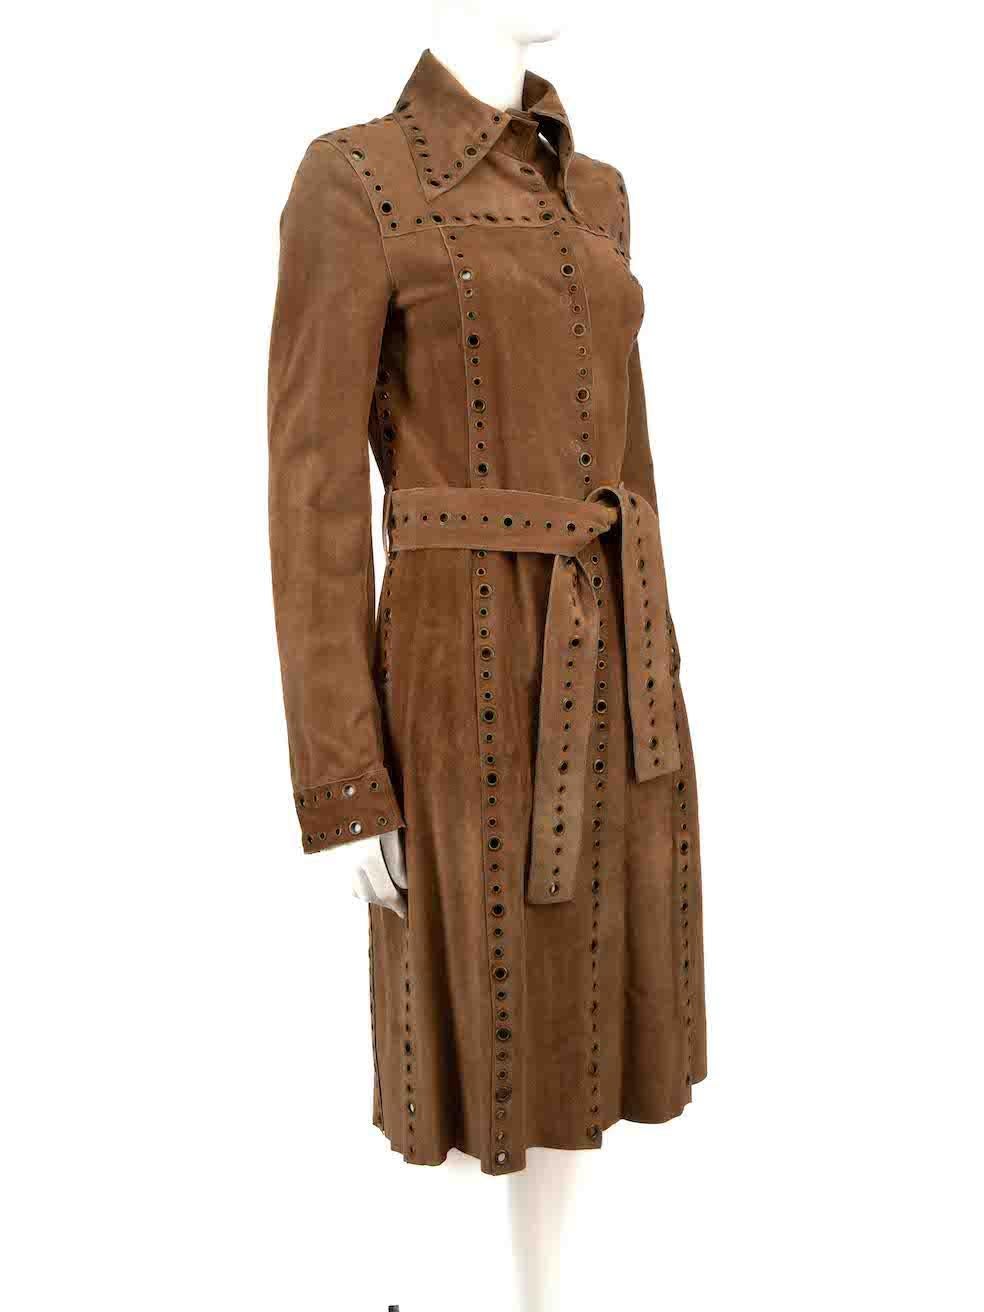 CONDITION is Very good. Minimal wear to the coat is evident. Light discolouration to the inside waist areas on this used Dolce & Gabbana designer resale item.
 
Details
Brown
Suede
Coat
Eyelet detail
Belted
Snap button fastening
2x Side pockets
